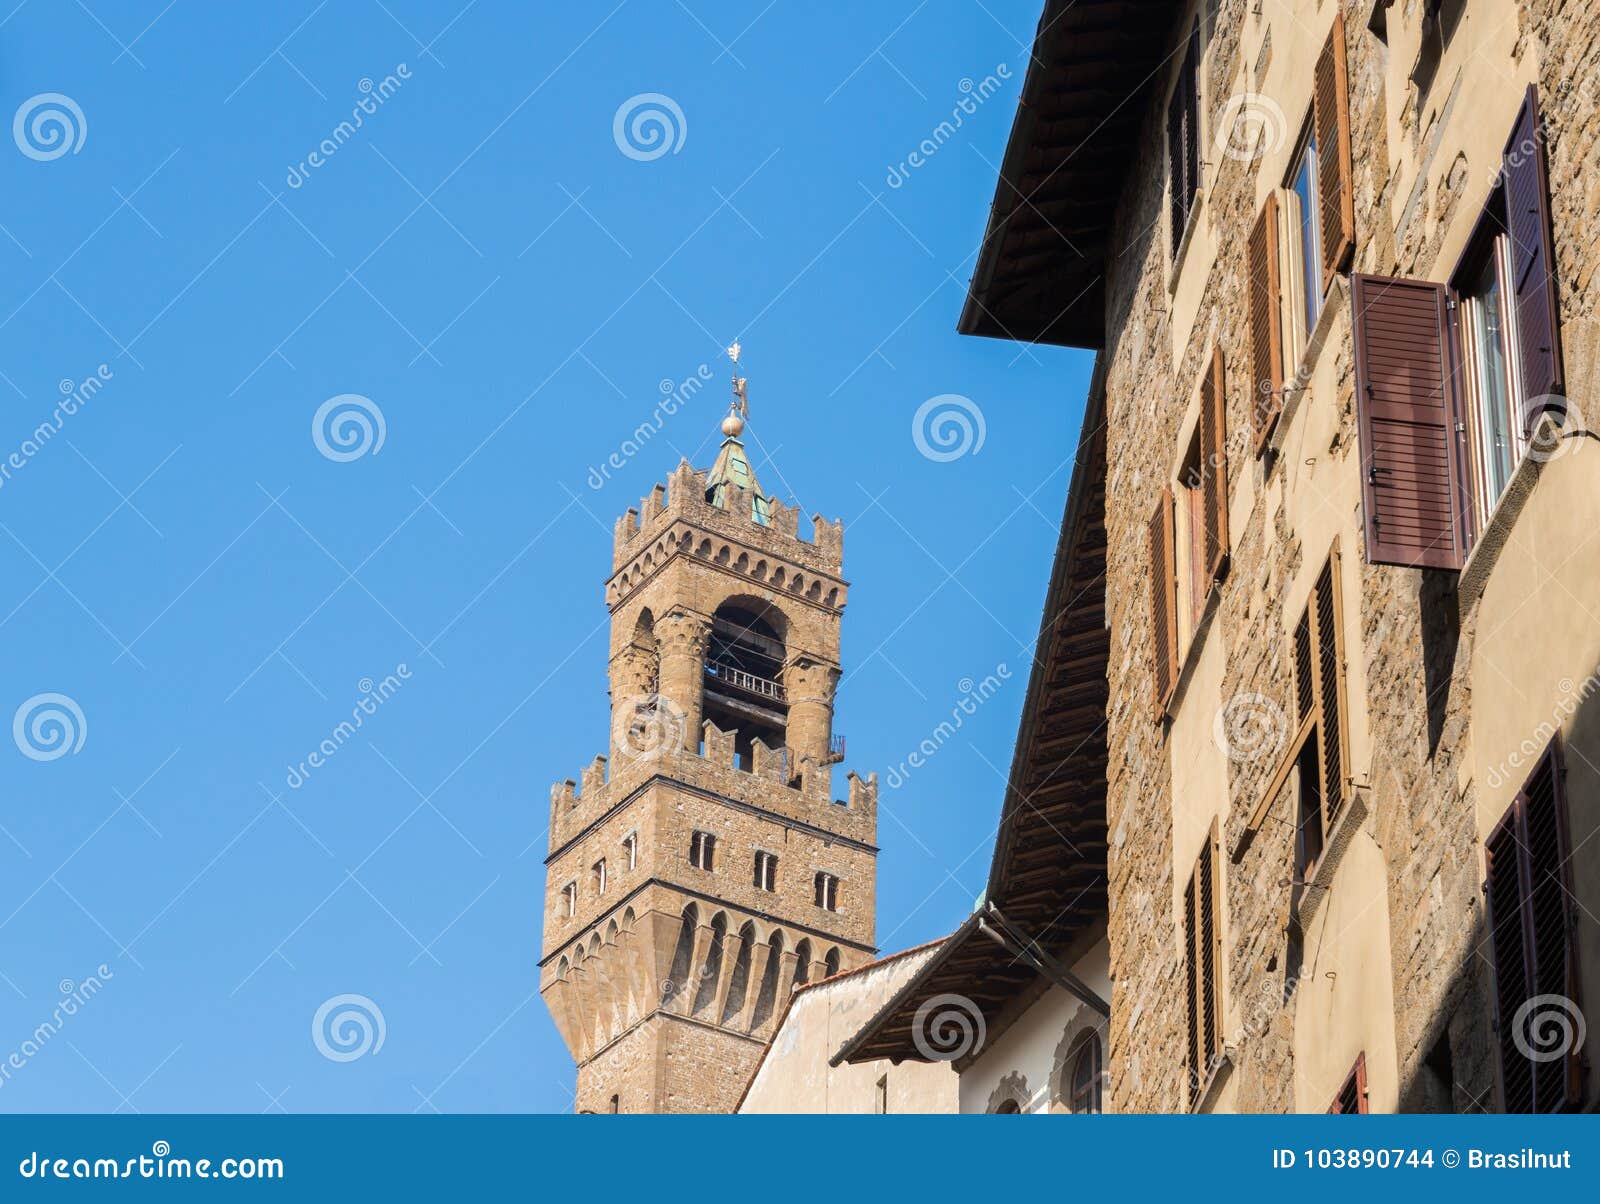 tower of arnolfo, florence, tuscany, italy